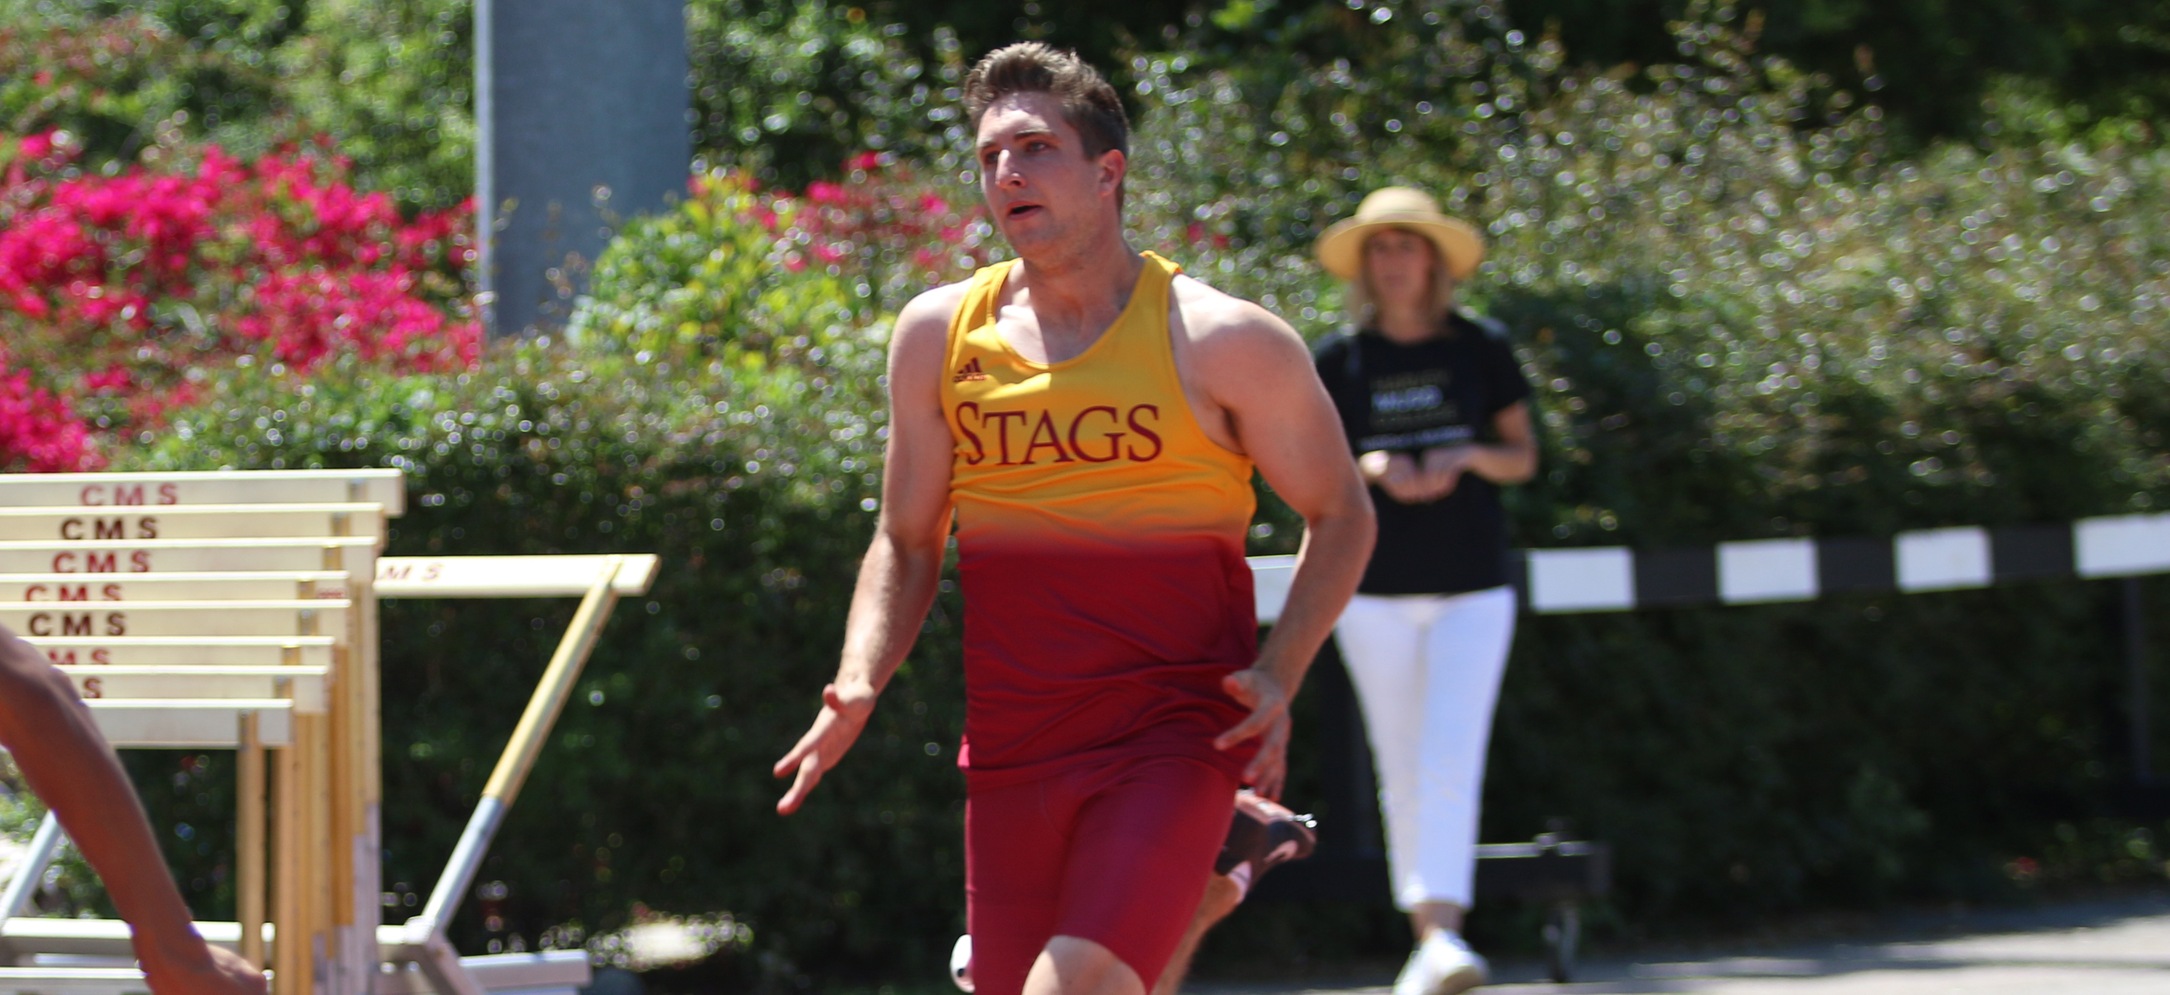 Connor Schulz (CMC) placed fifth in the decathlon. (photo credit: Alisha Alexander)